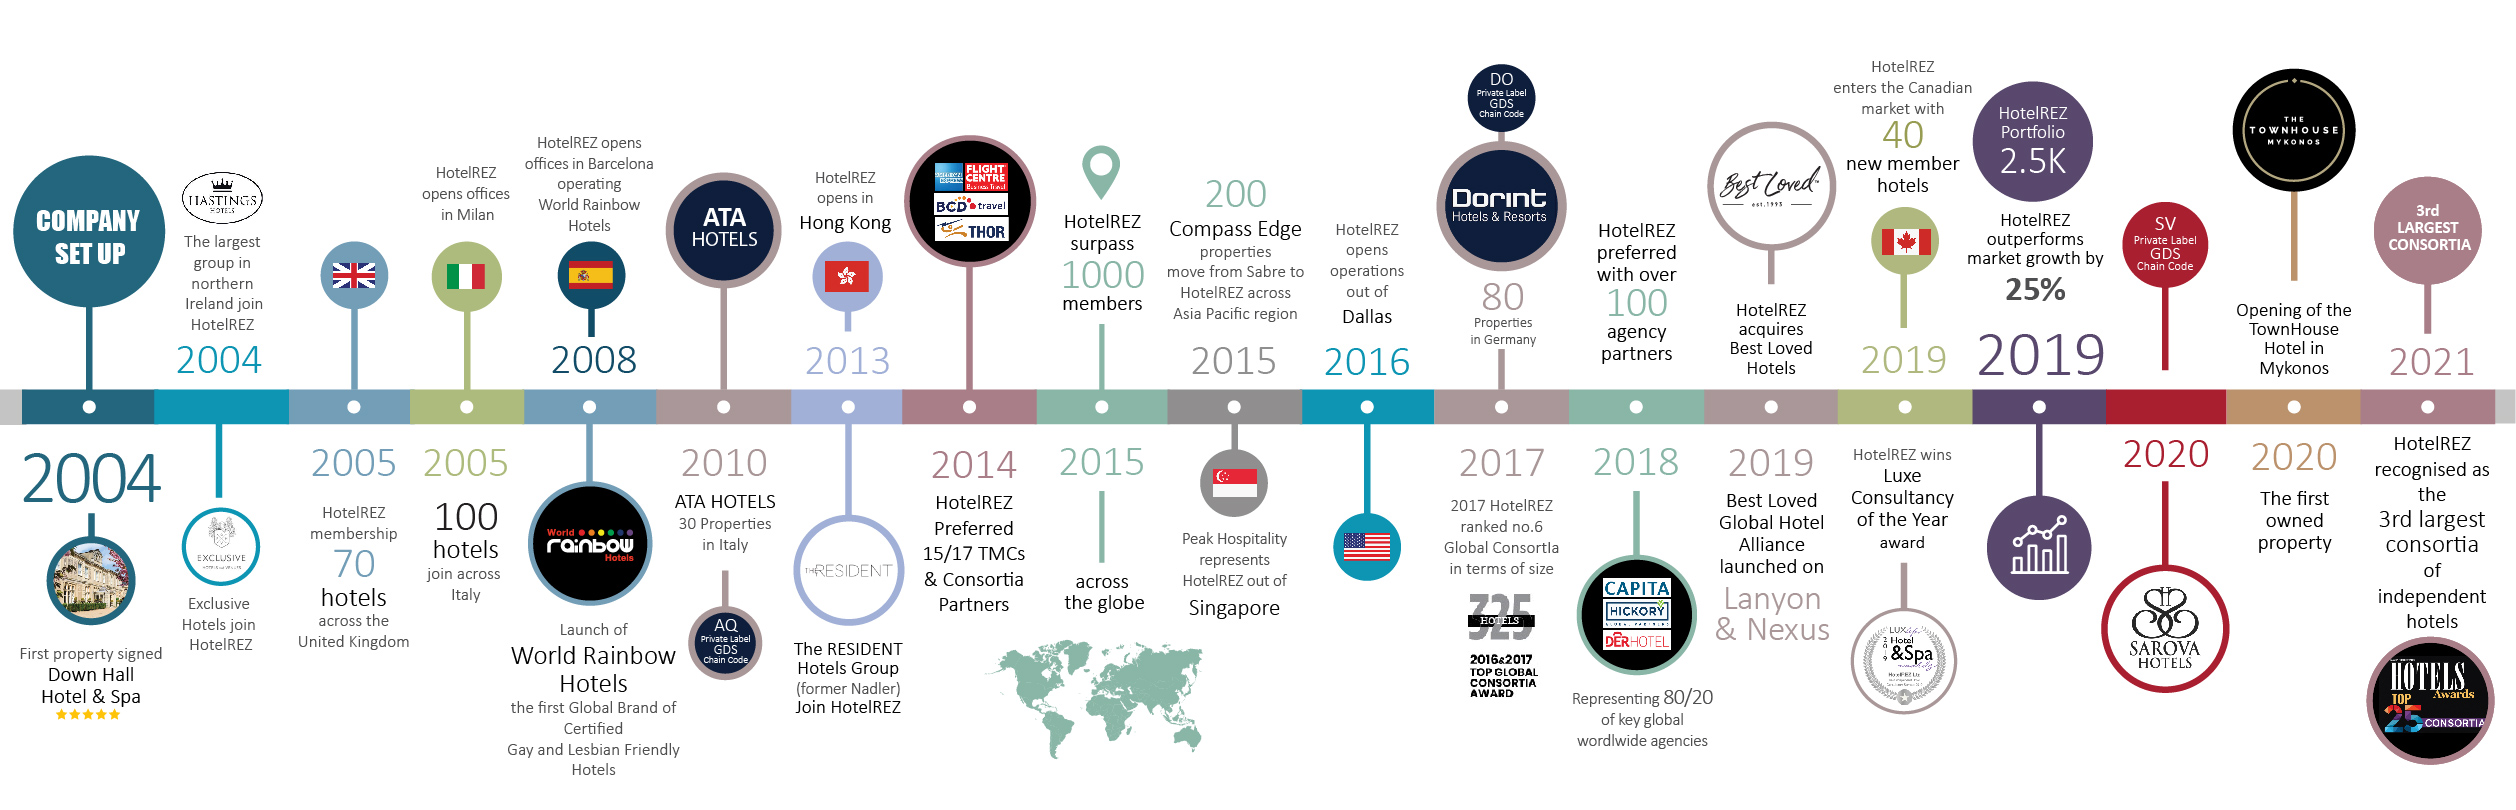 infographic timeline of the history of HotelREZ SINCE 2004